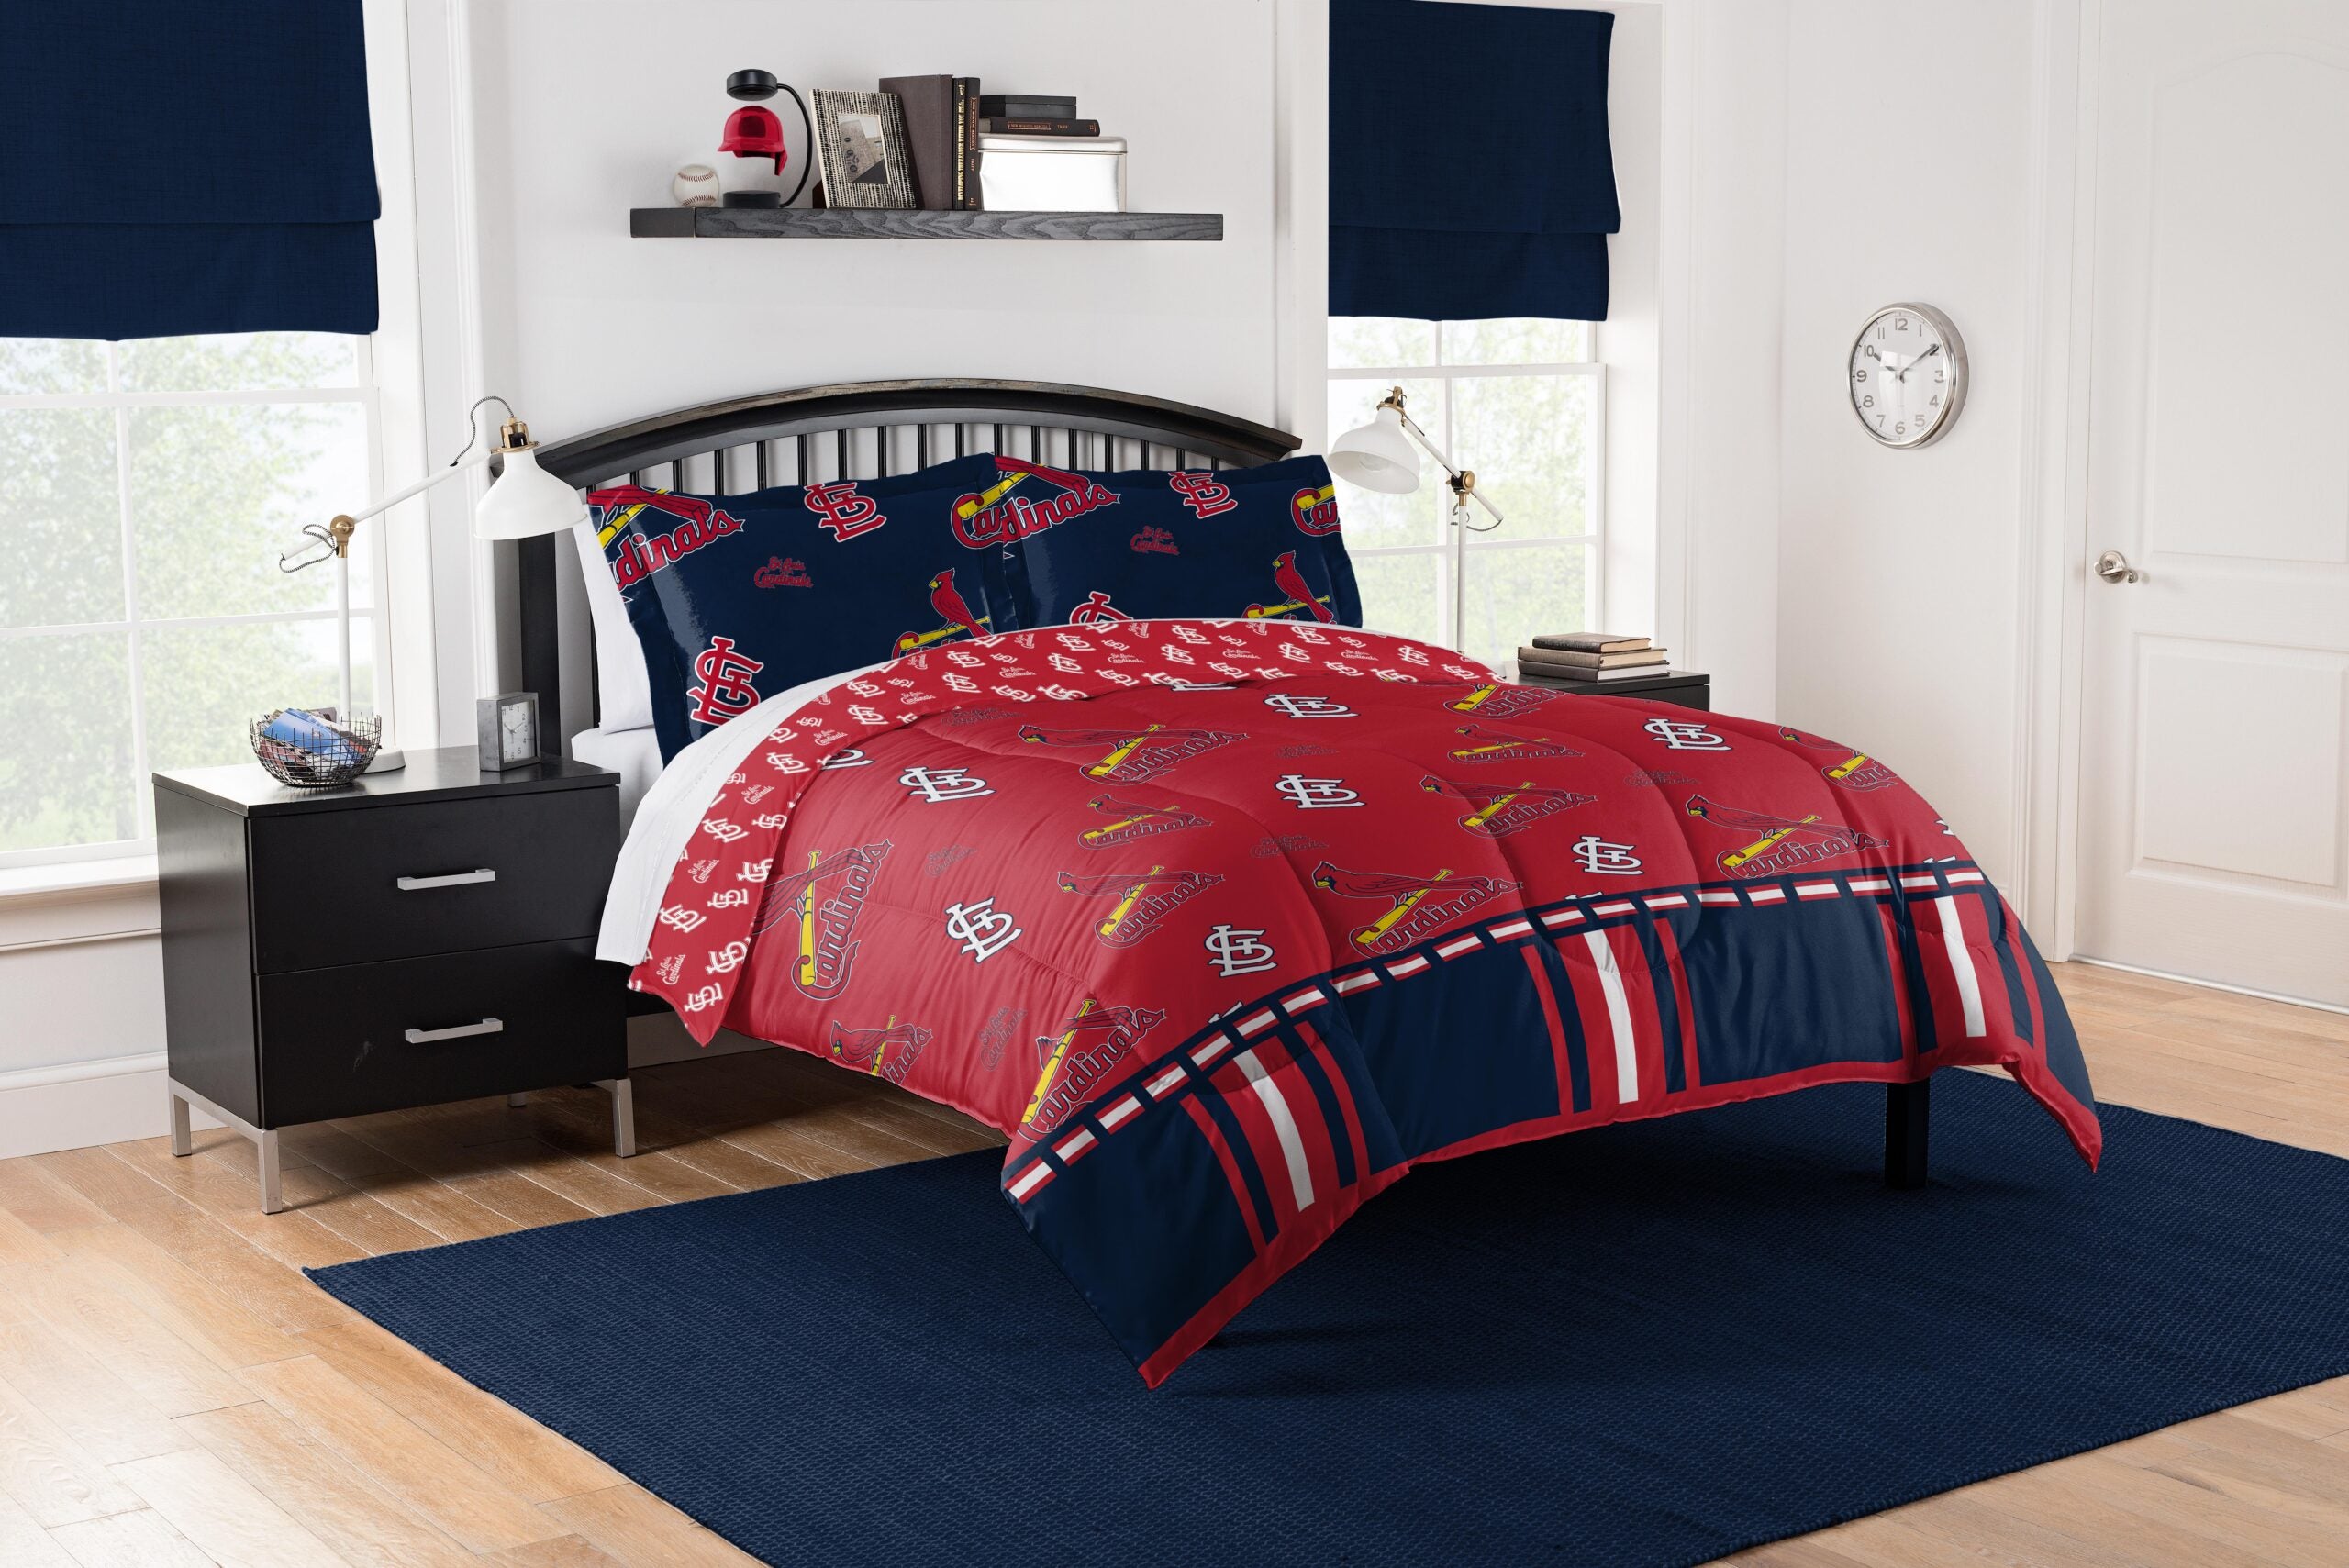 MLB St. Louis Cardinals Rotary Queen Bed In A Bag Set 86 x 86 Inches